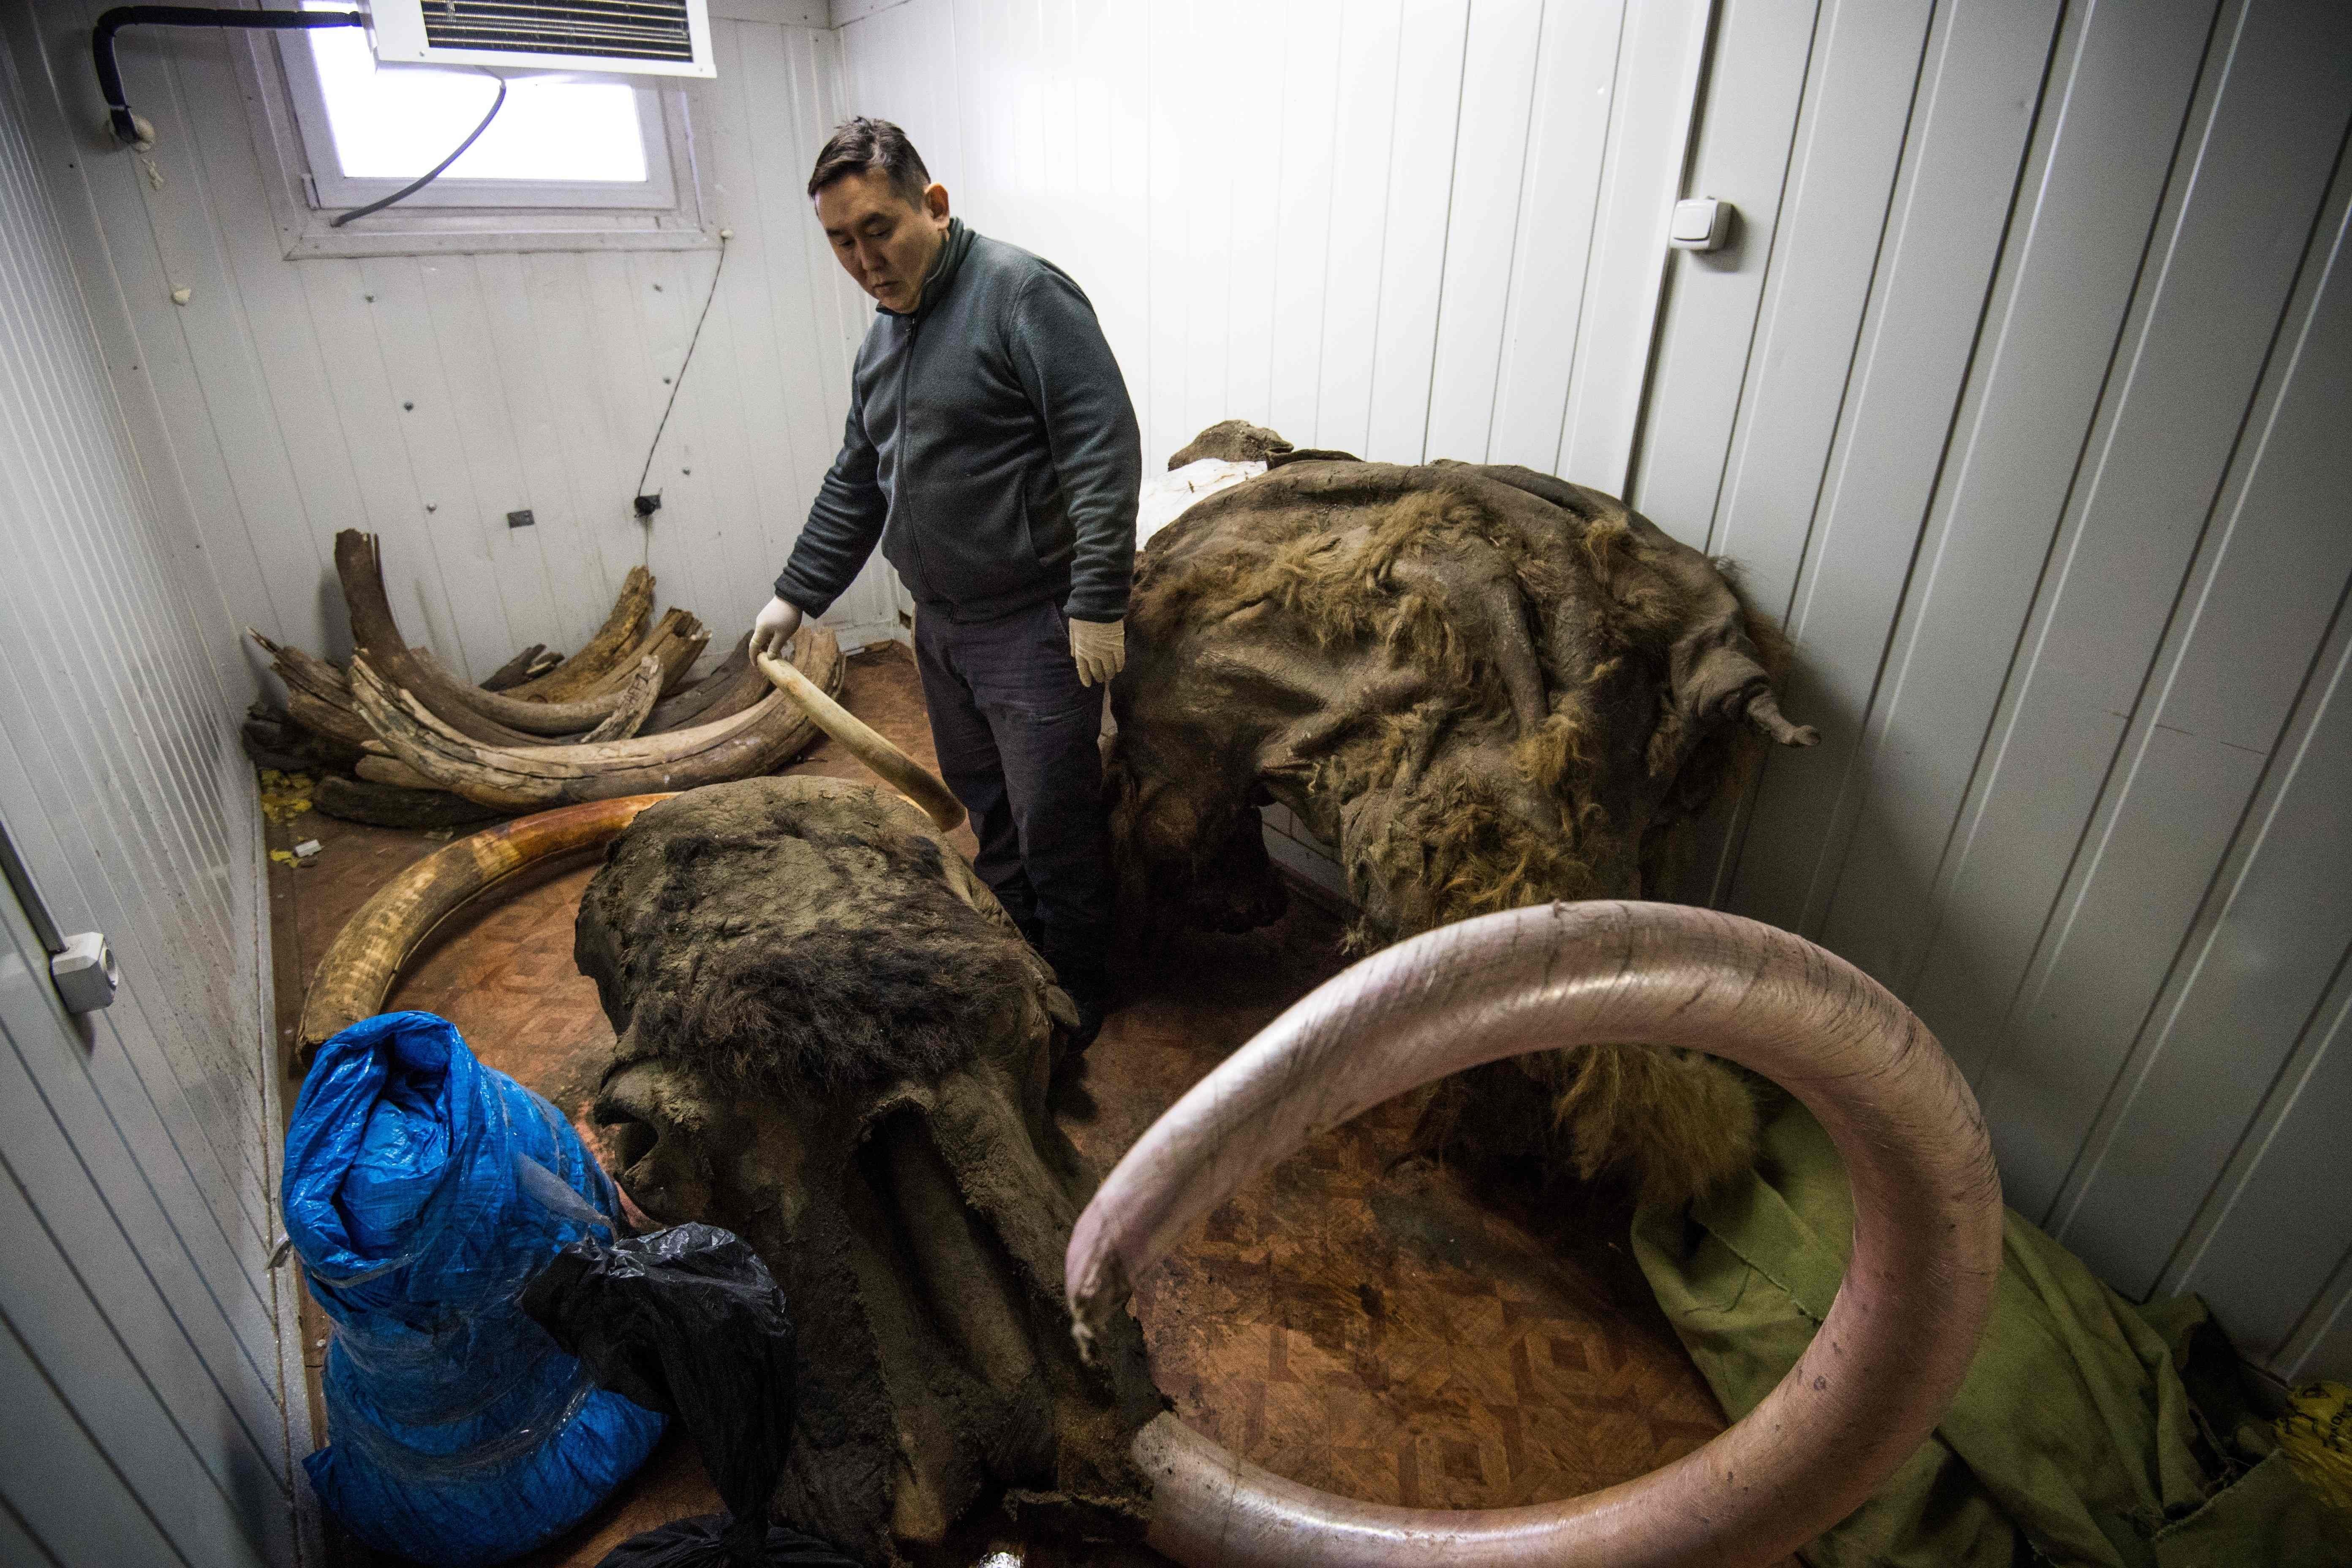 Valery Plotnikov, a palaeontologist at the Yakutia Academy of Sciences, stands near collected tusks in his laboratory on November 28, 2018. Photo: AFP